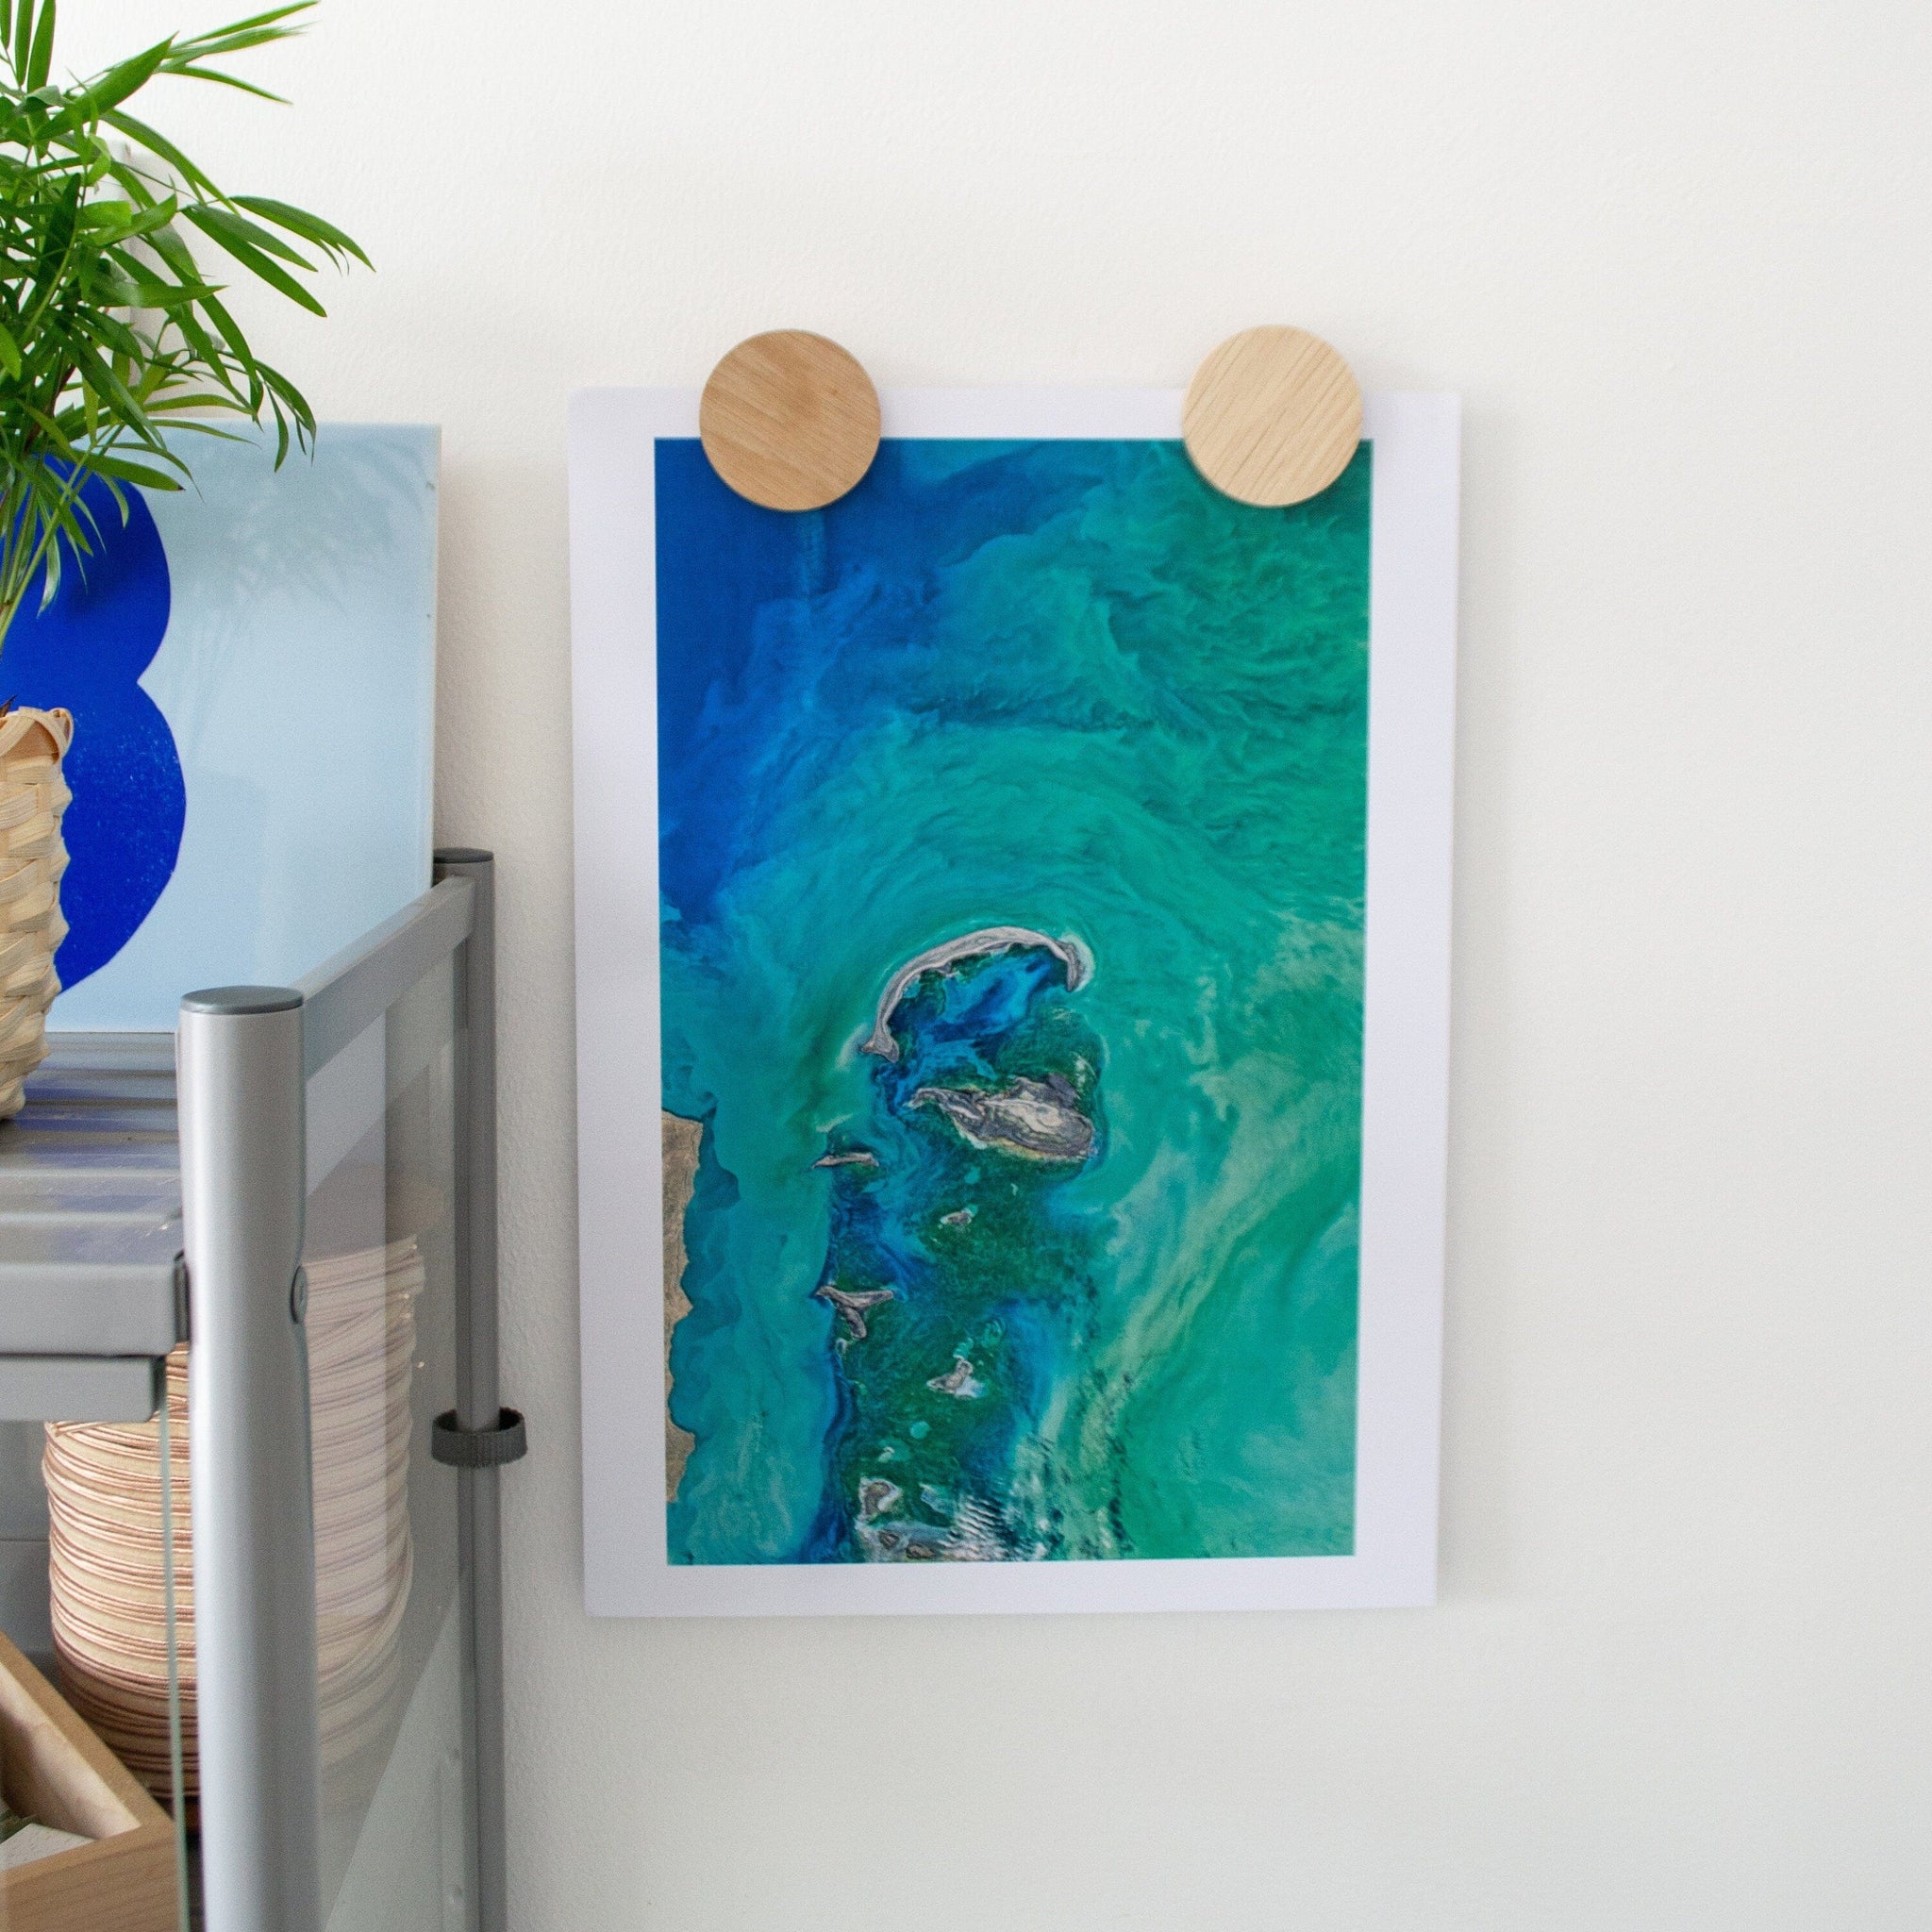 Hang Prints with Magnets • Points in Focus Photography